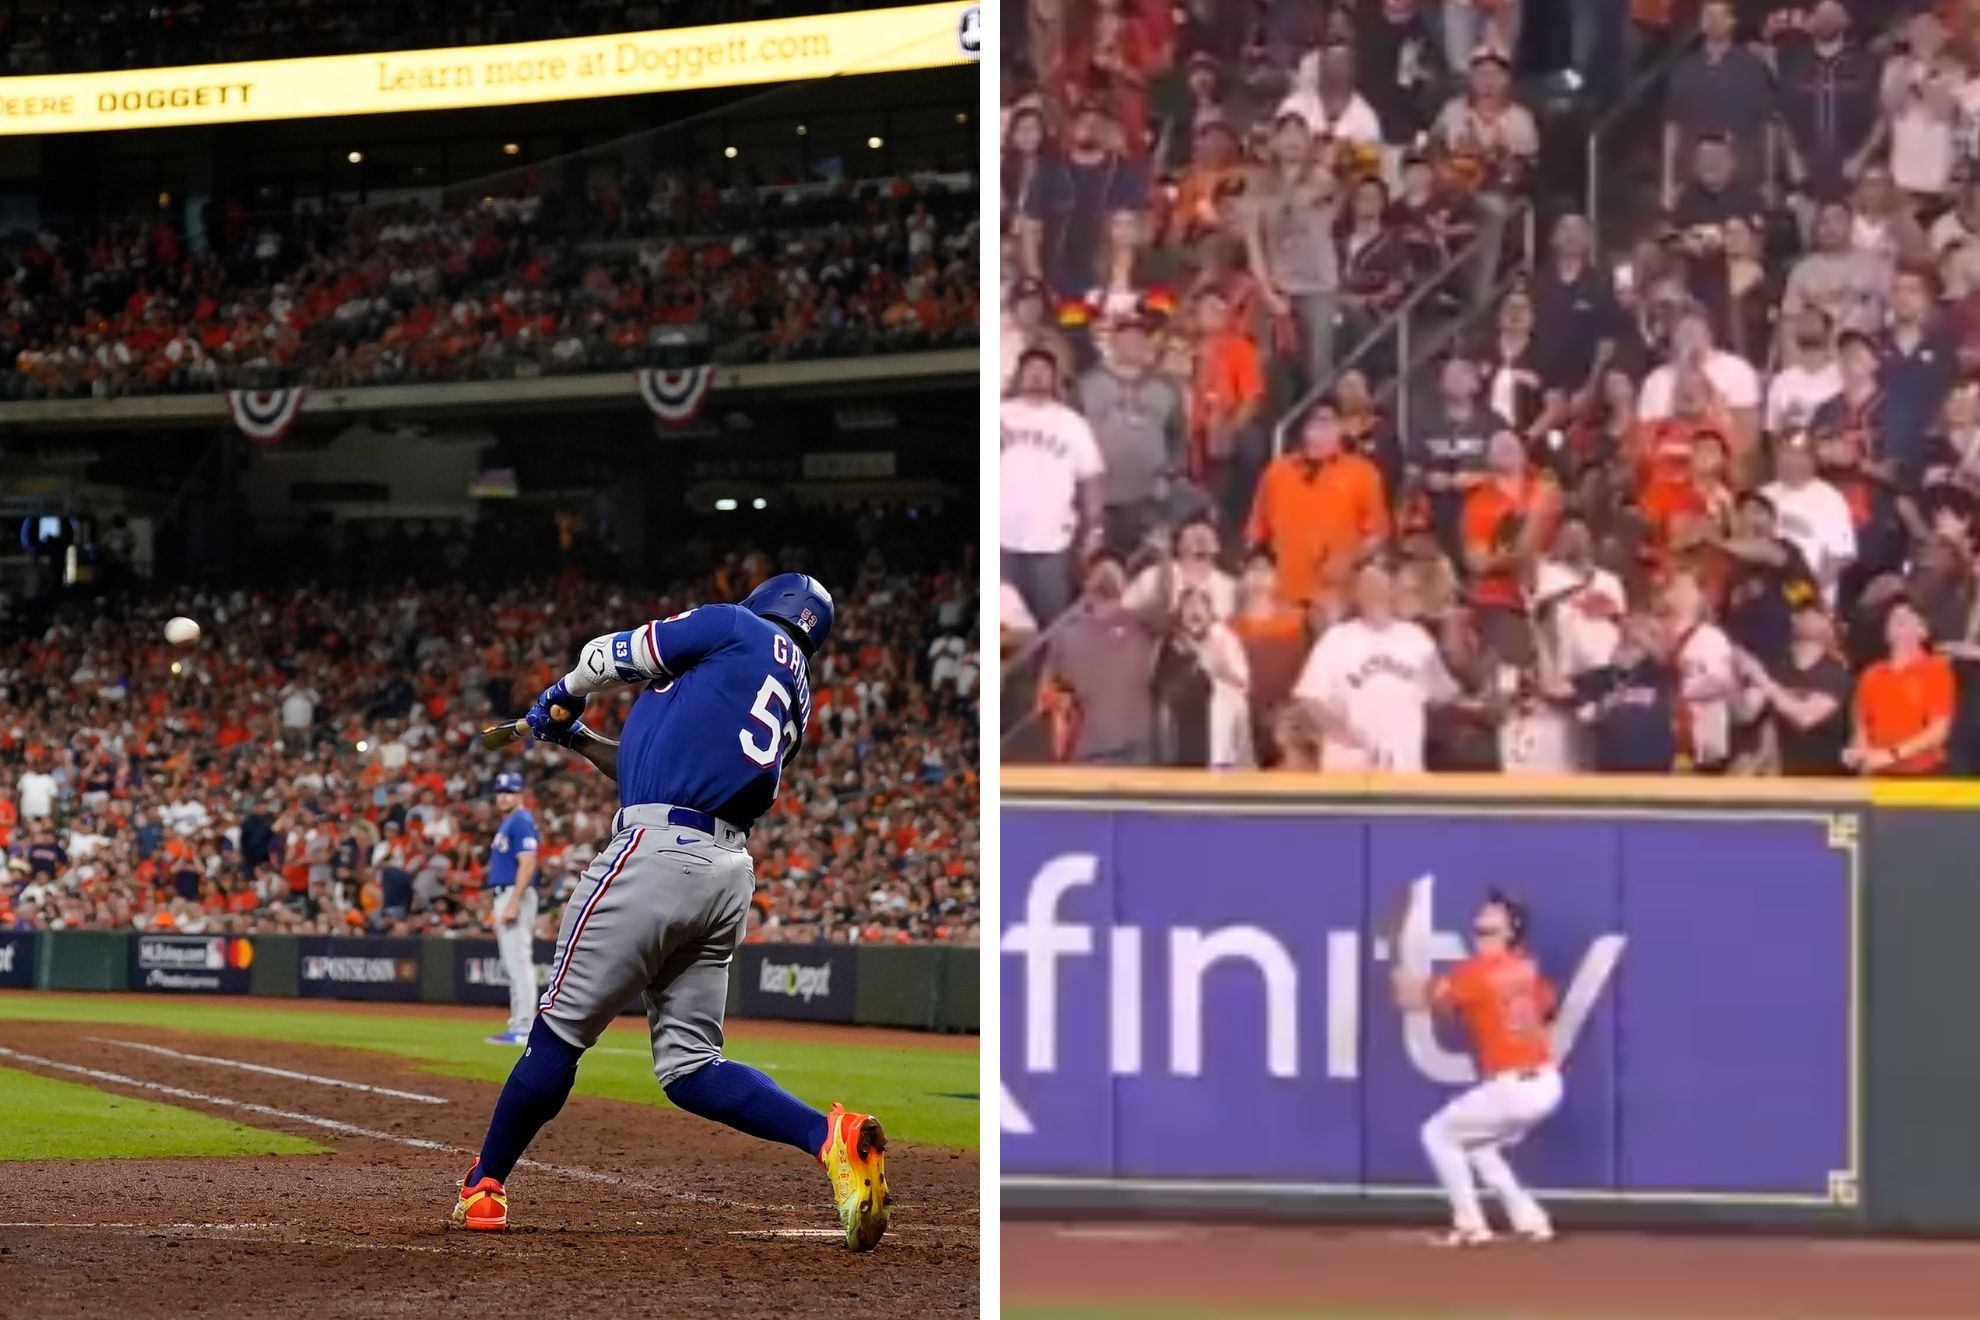 MLB fan makes barehanded HR catch in Game 6 of ALCS between Astros, Rangers